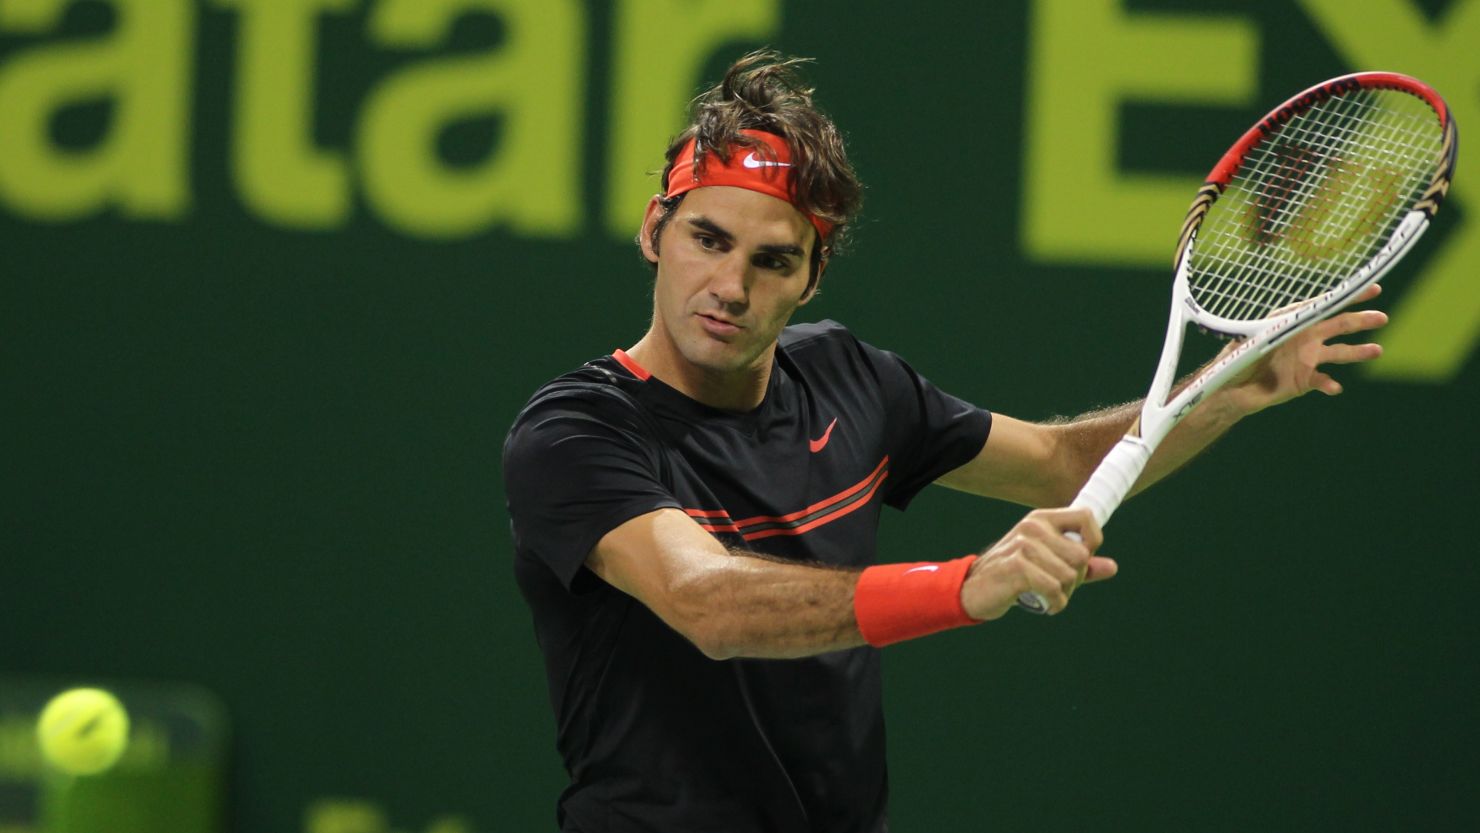 Roger Federer was made to battle by Andreas Seppi before reaching the semifinals of the Qatar Open.